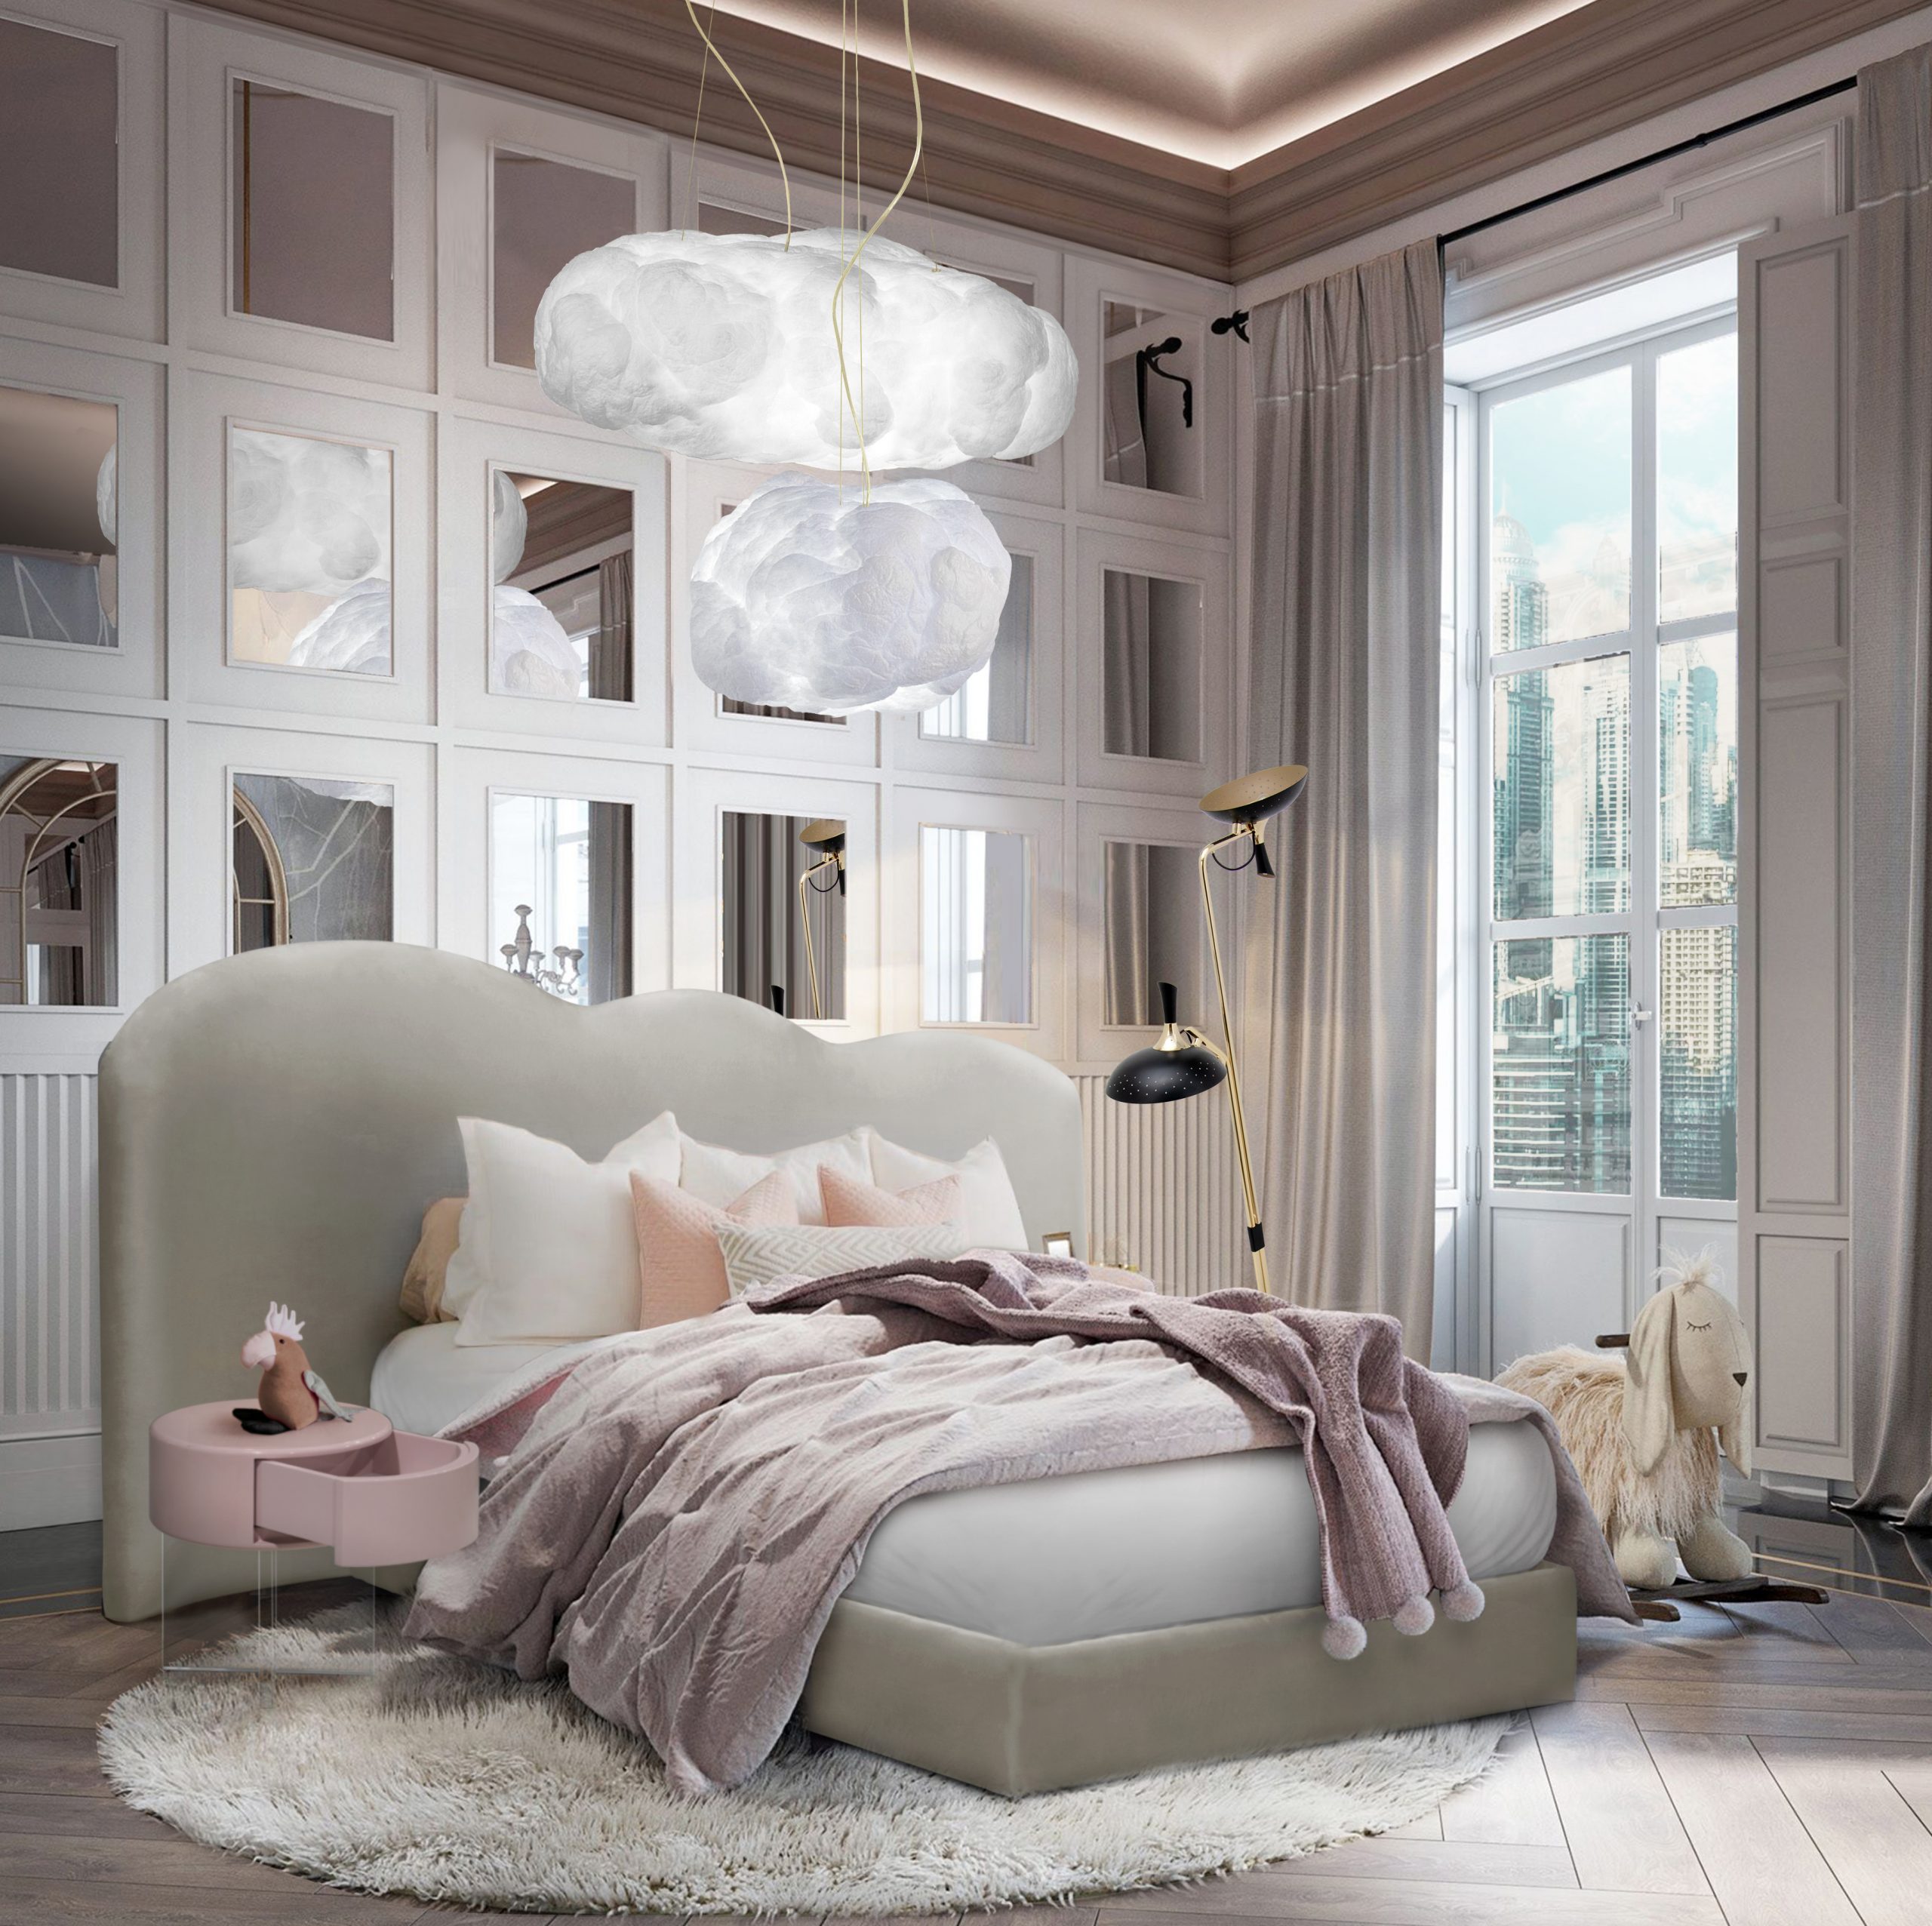 The New Inspirational Category For Every Room: Rooms Inspiration